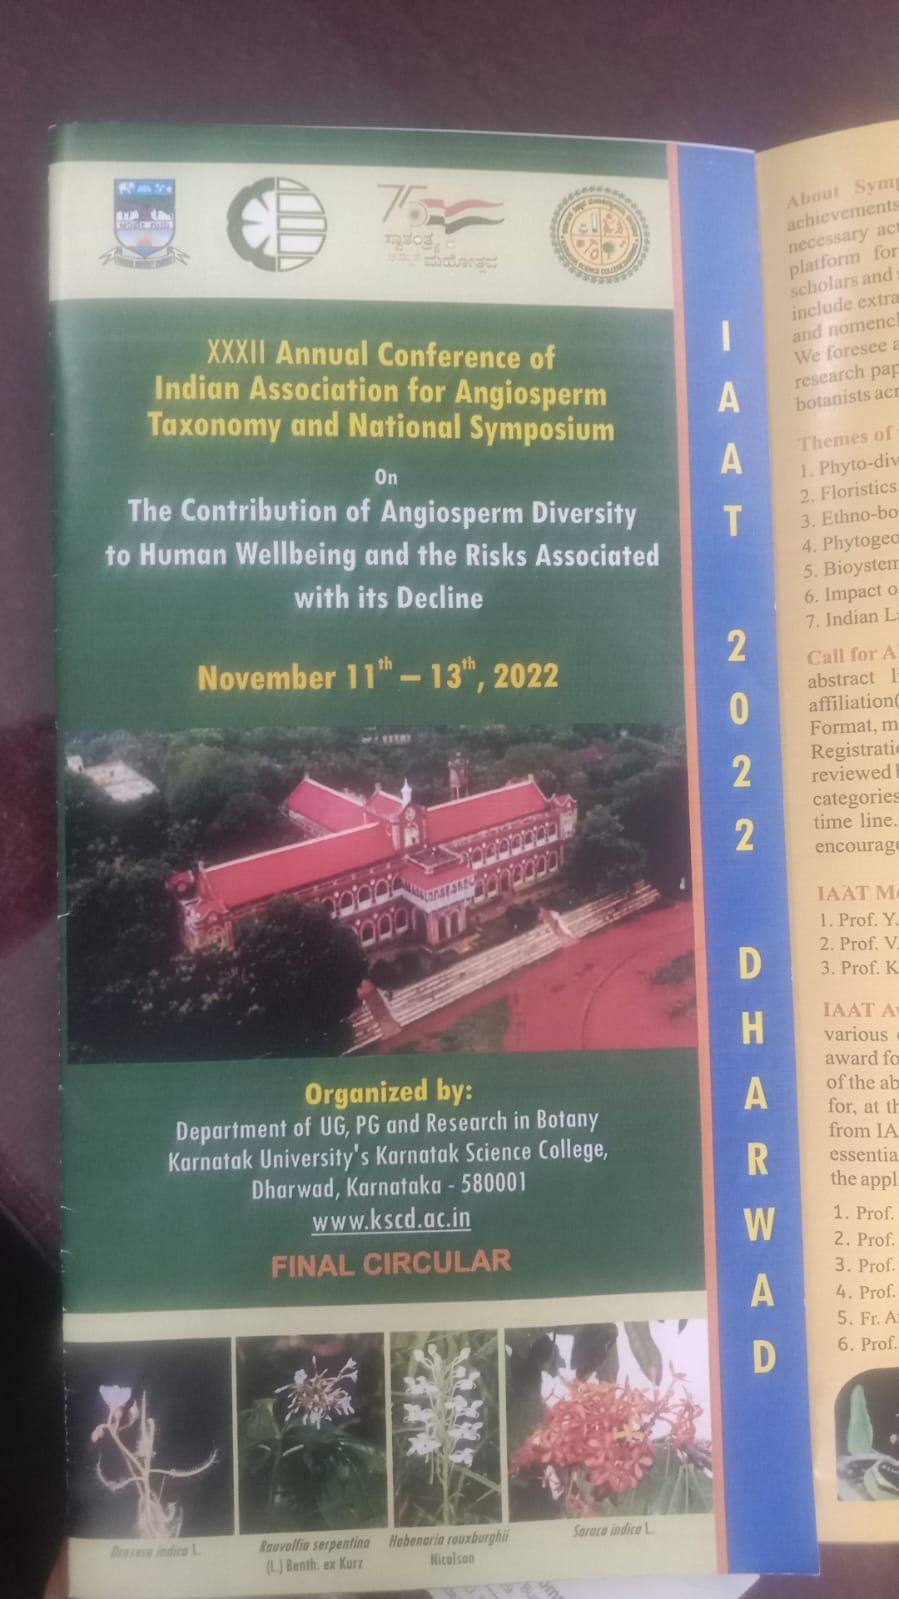 XXXII Annual Conference of Indian Association for Angiosperm Taxonomy and National Symposium.